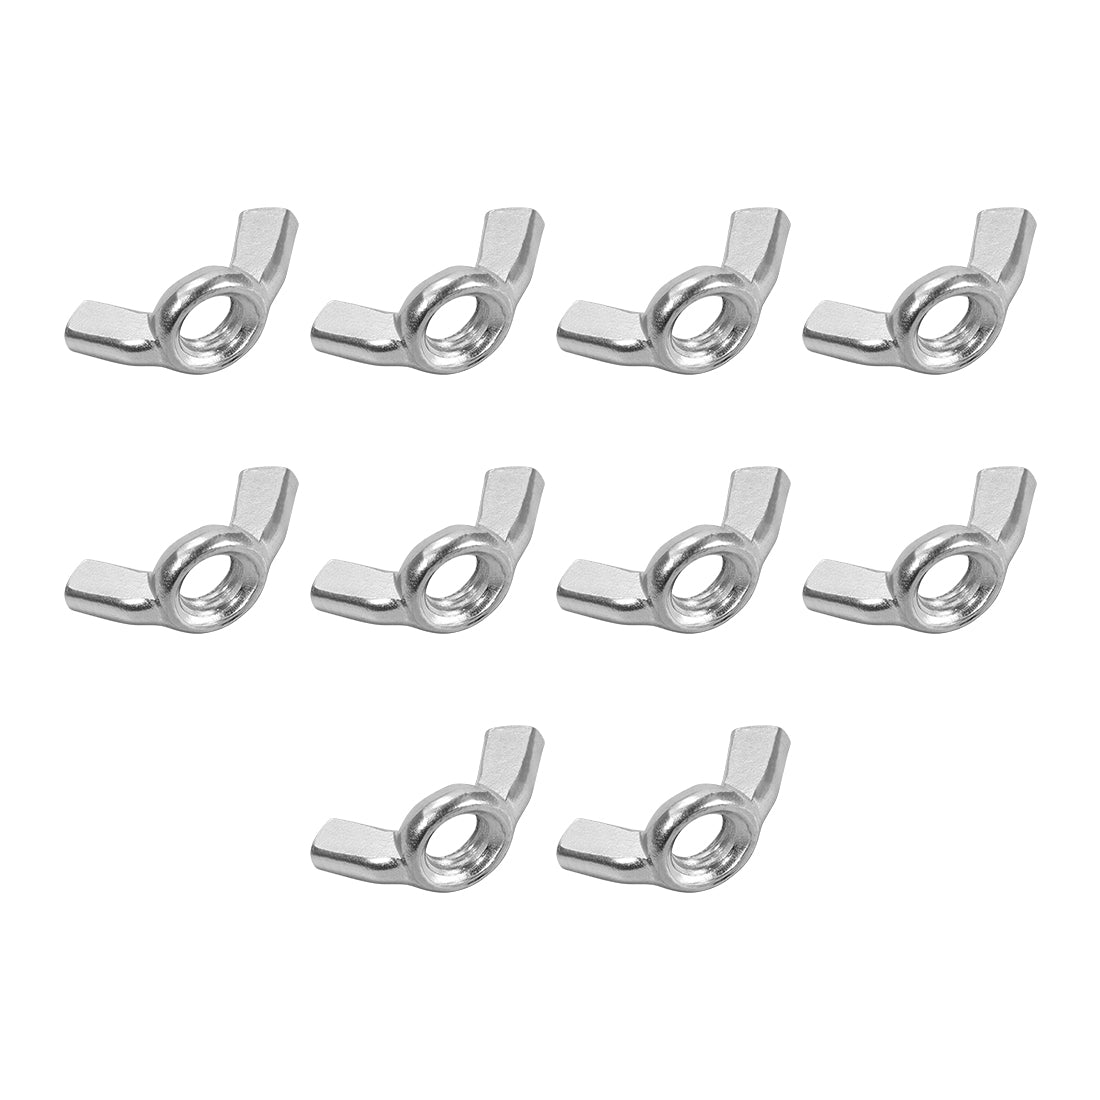 uxcell Uxcell Imperial Wing Nuts, Carbon Steel Zinc Plated Hand Twist Tighten Ear Butterfly Nut, 10 Pcs